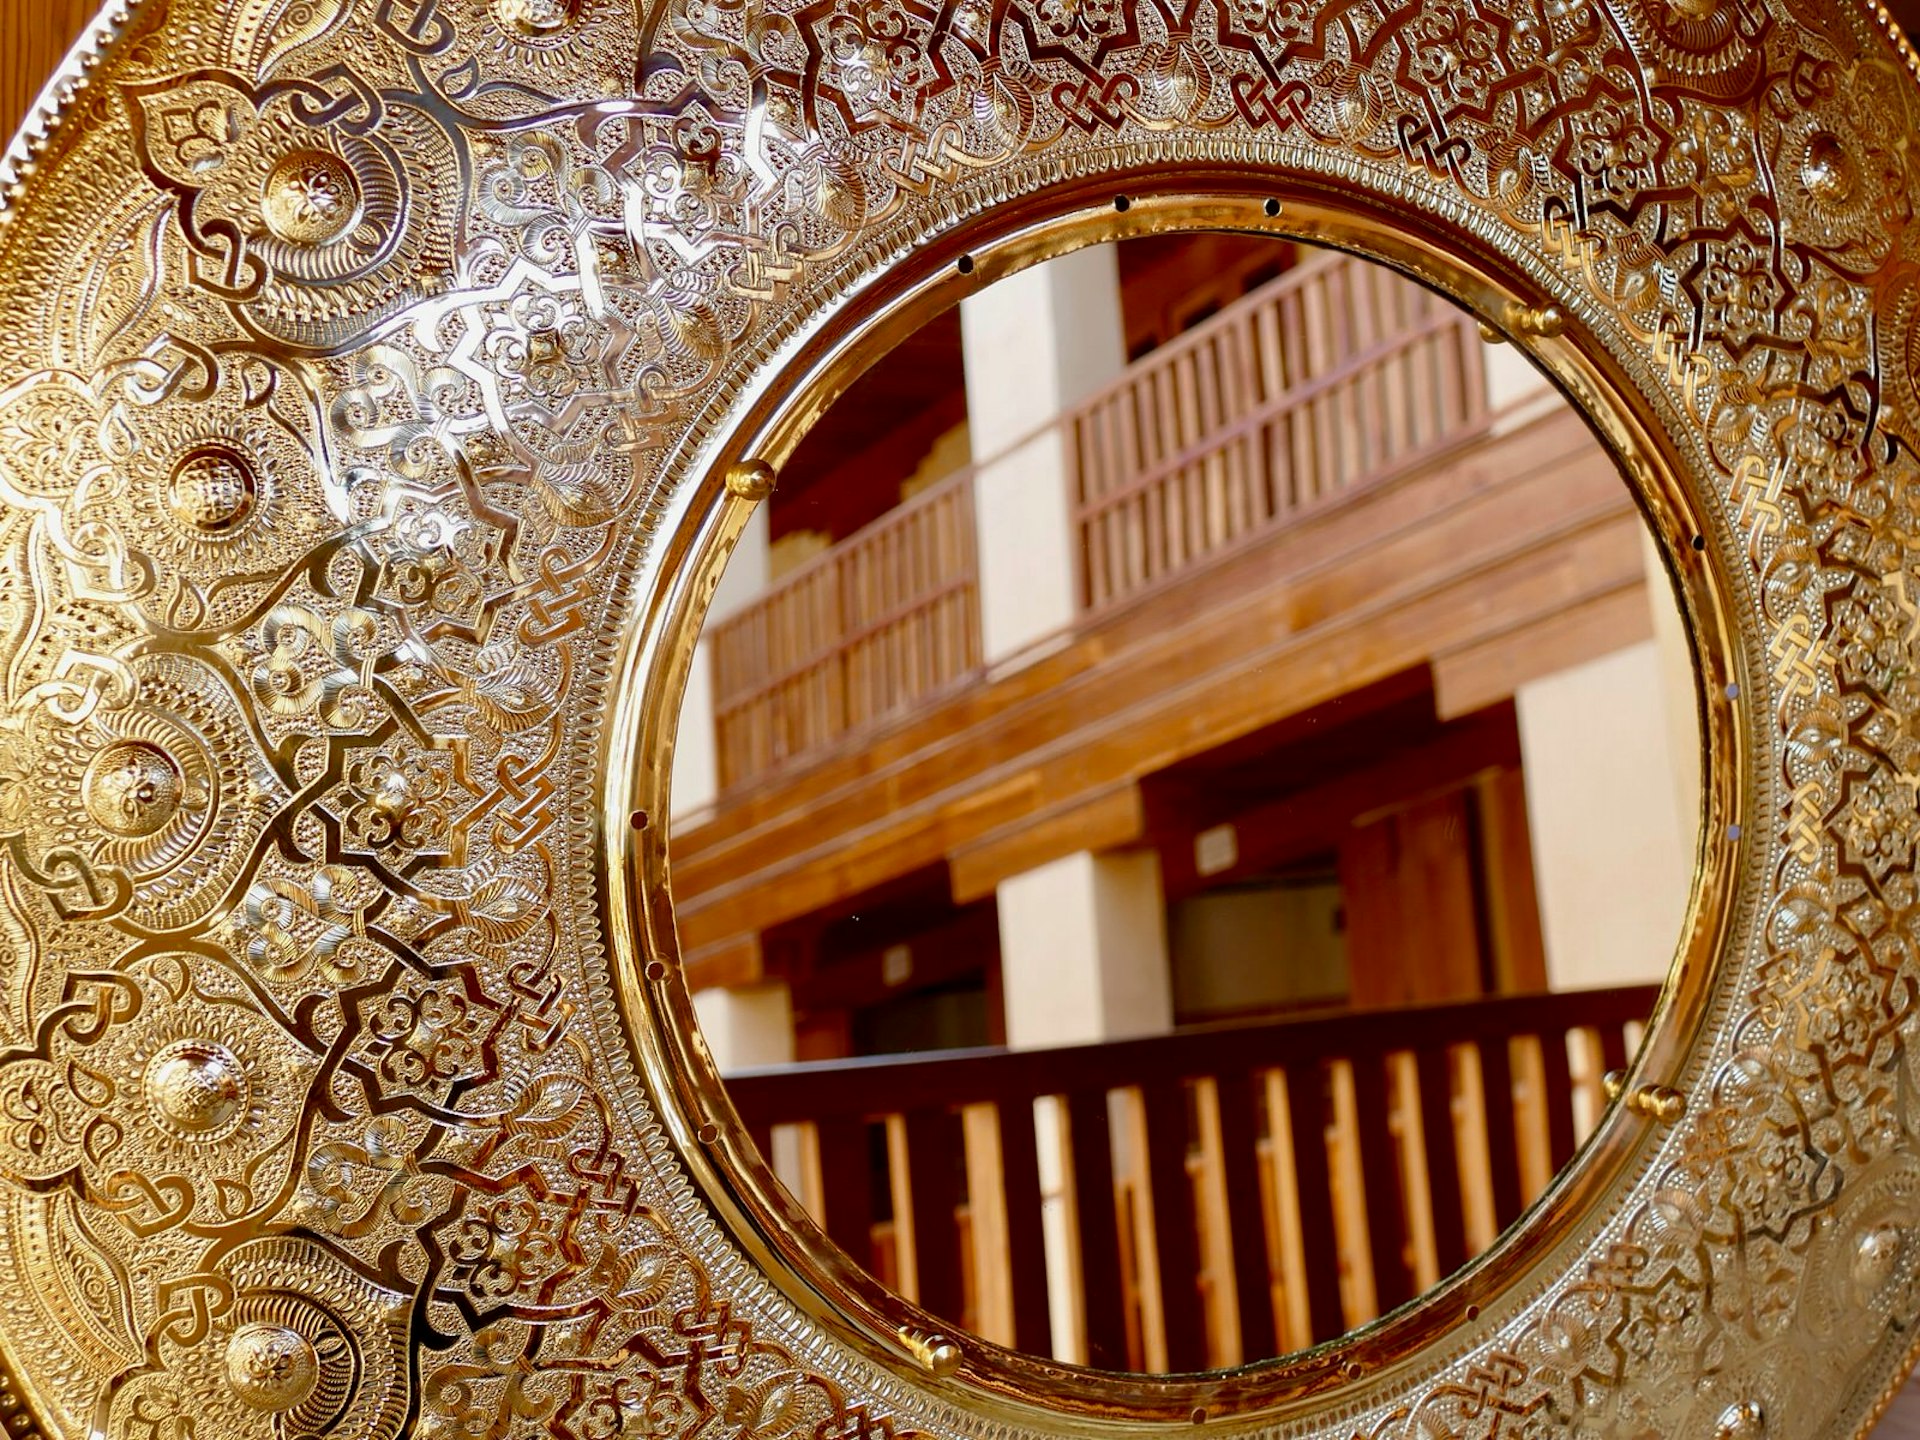 Brass etching and mirror at Chemmaine-Sbityrine funduq, Fez, Morocco